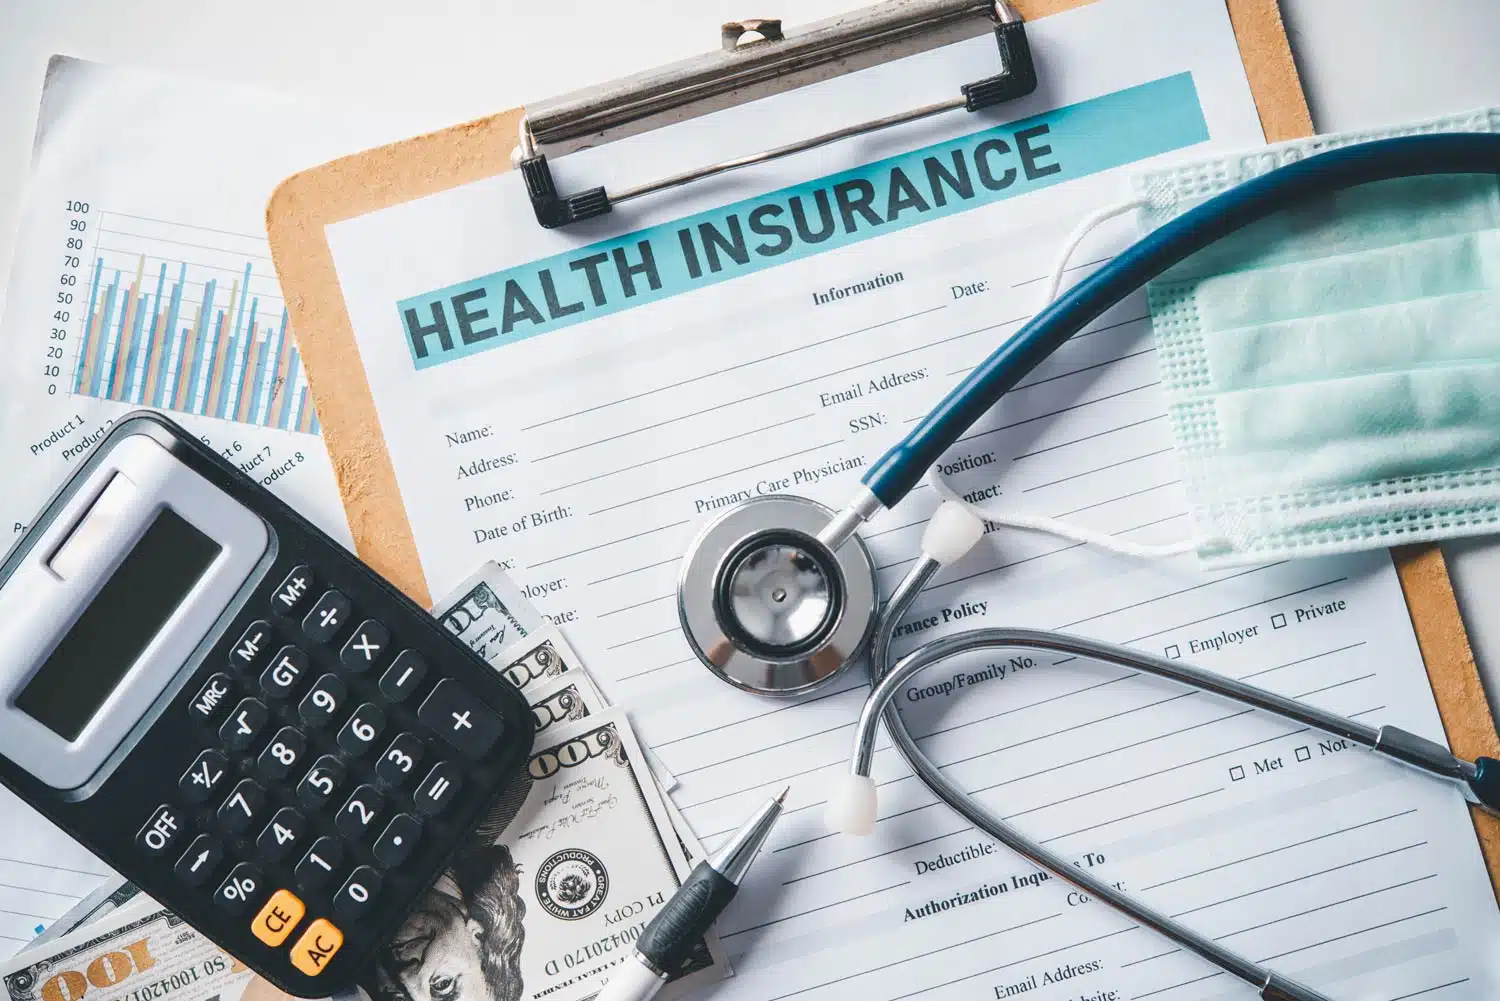 Featured image for “Health Insurance”